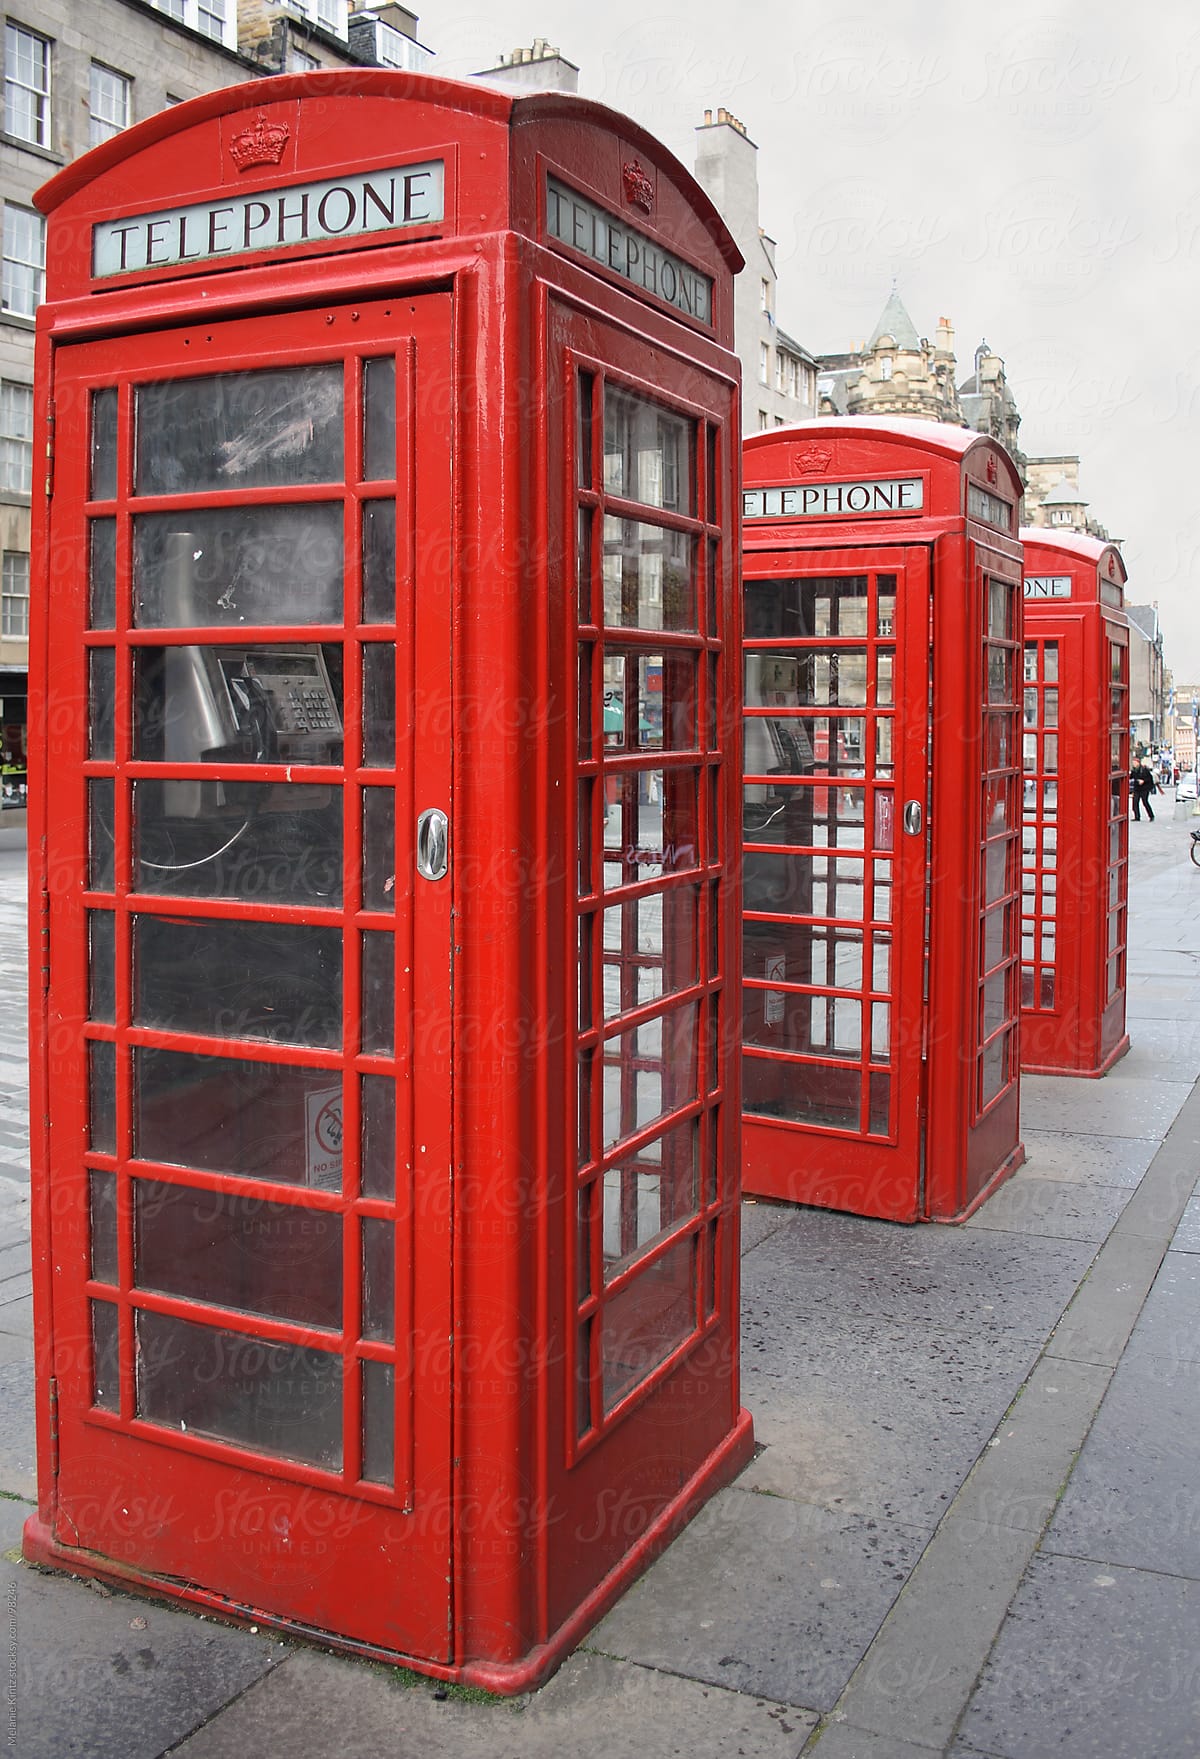 Three typical English phone boxes in a row